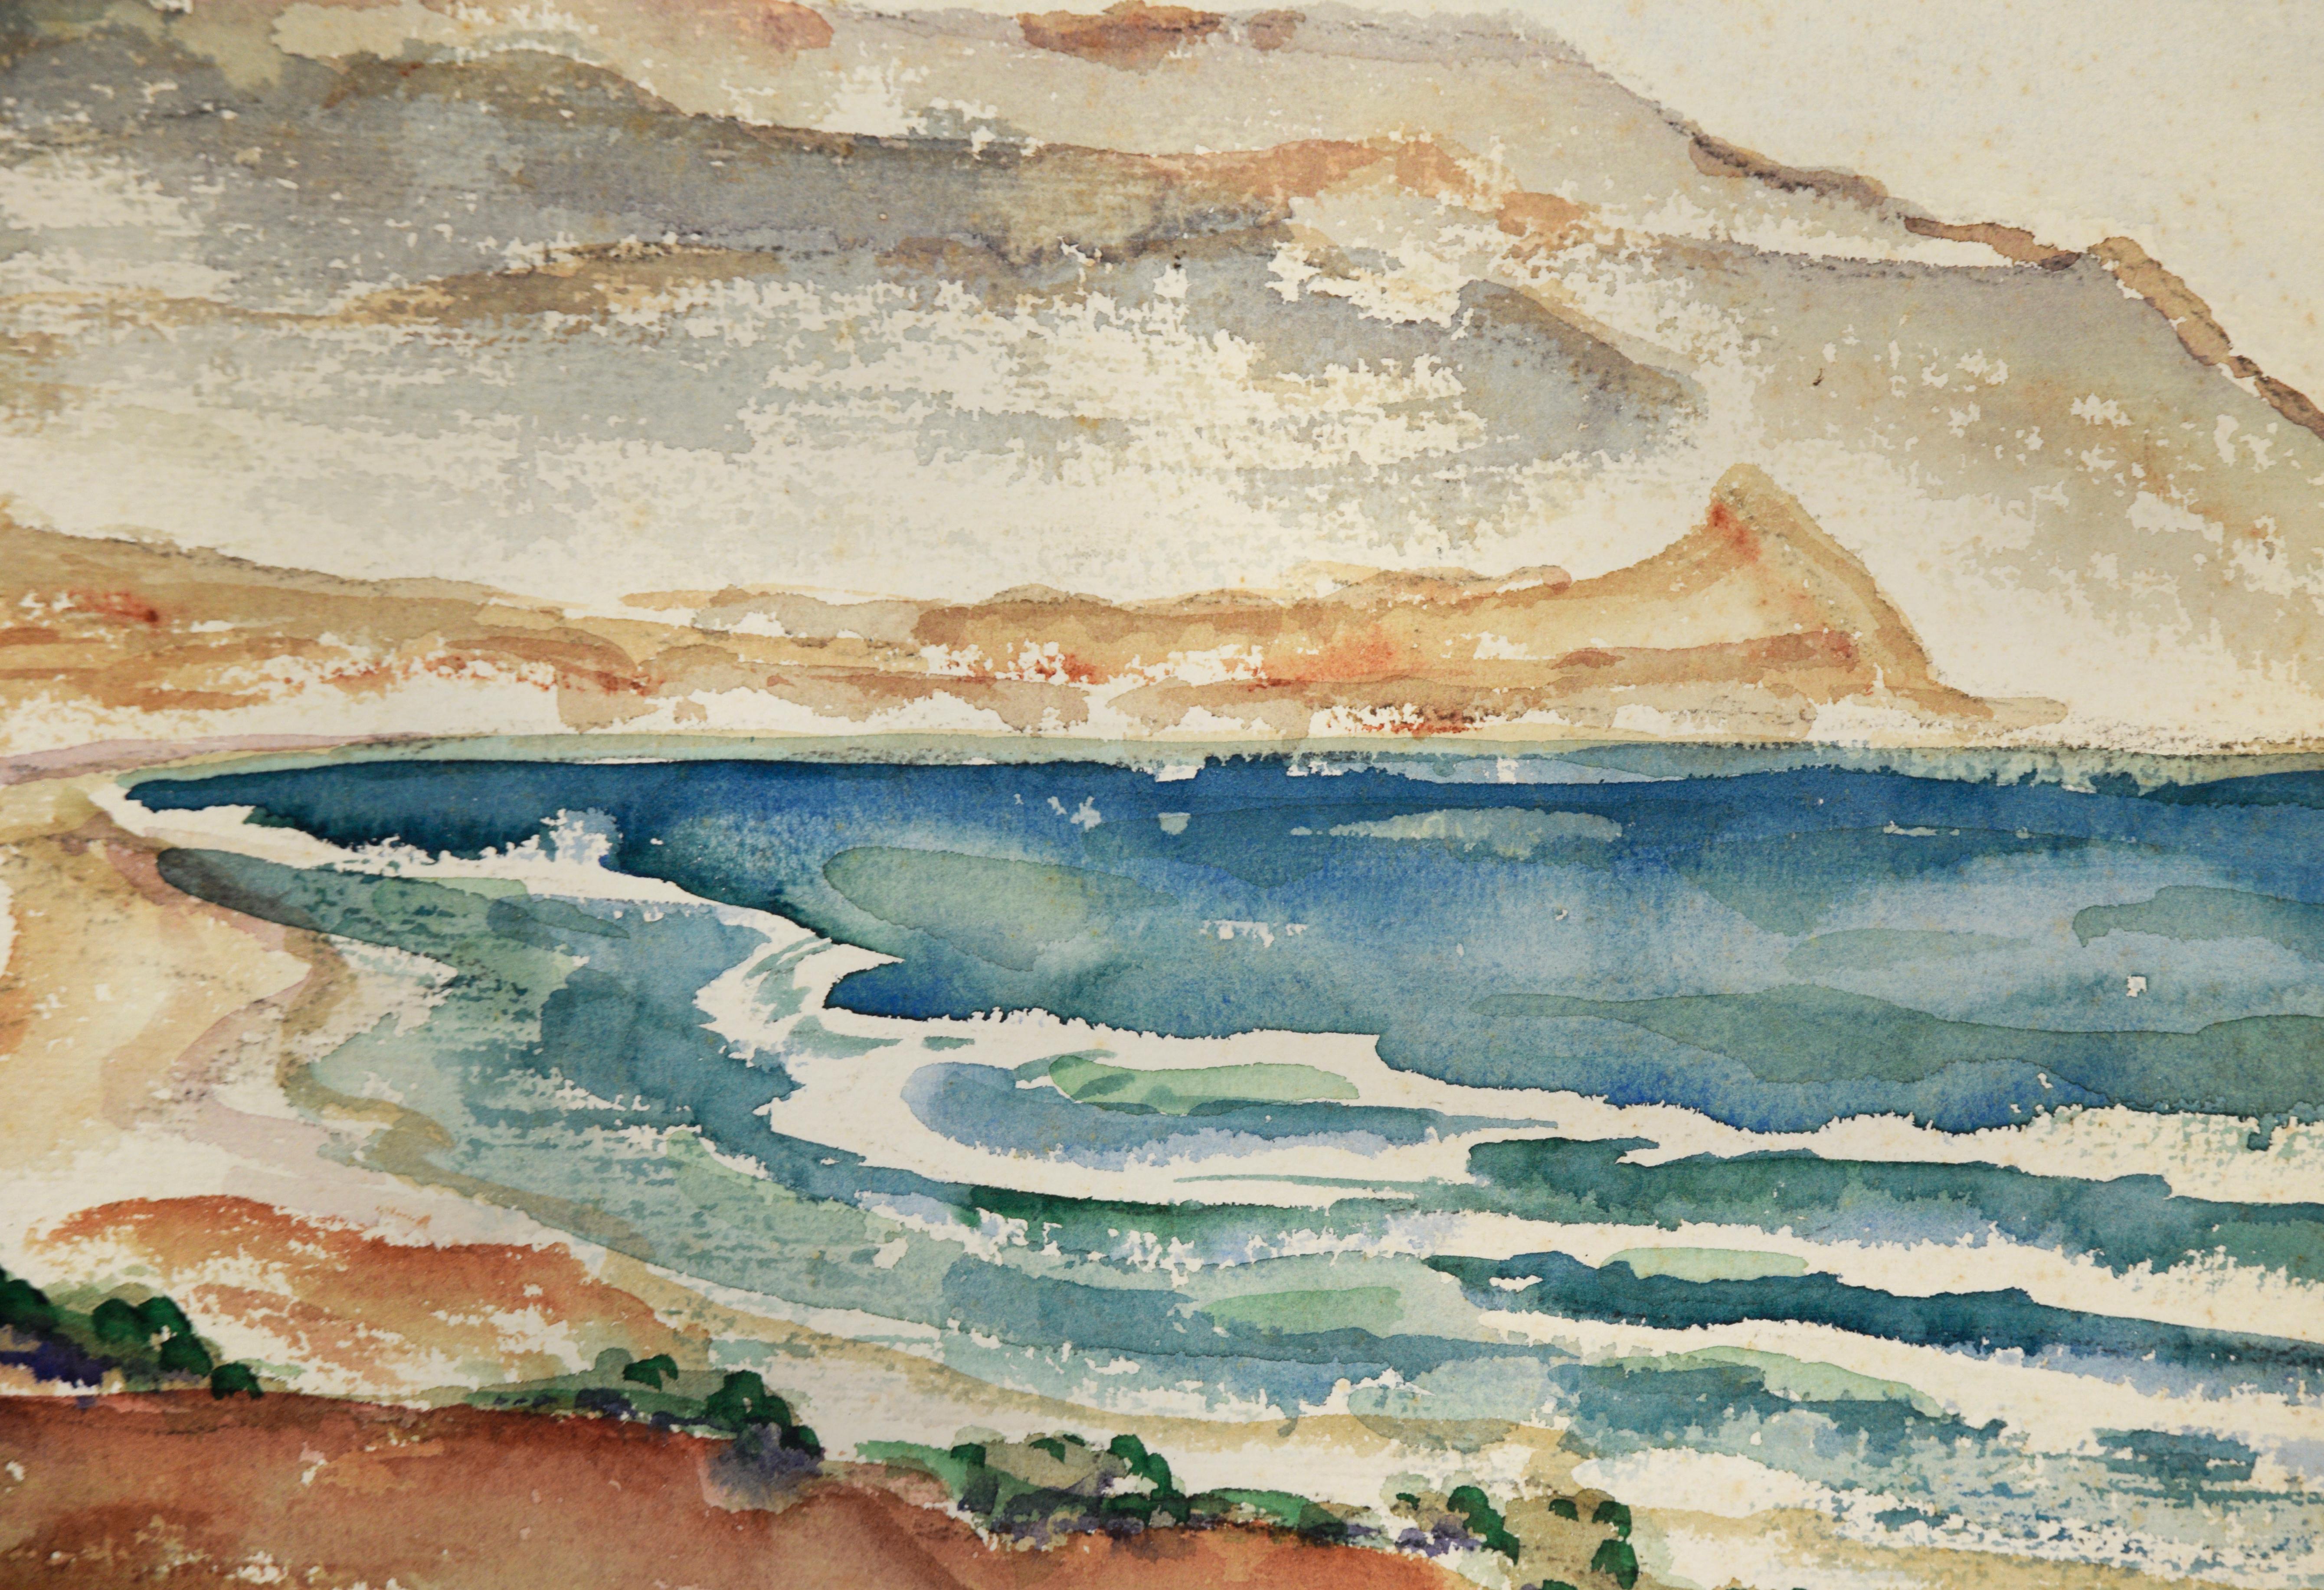 Hermosa Beach Coastline - Watercolor On Paper - American Impressionist Painting by FJ Whitlock